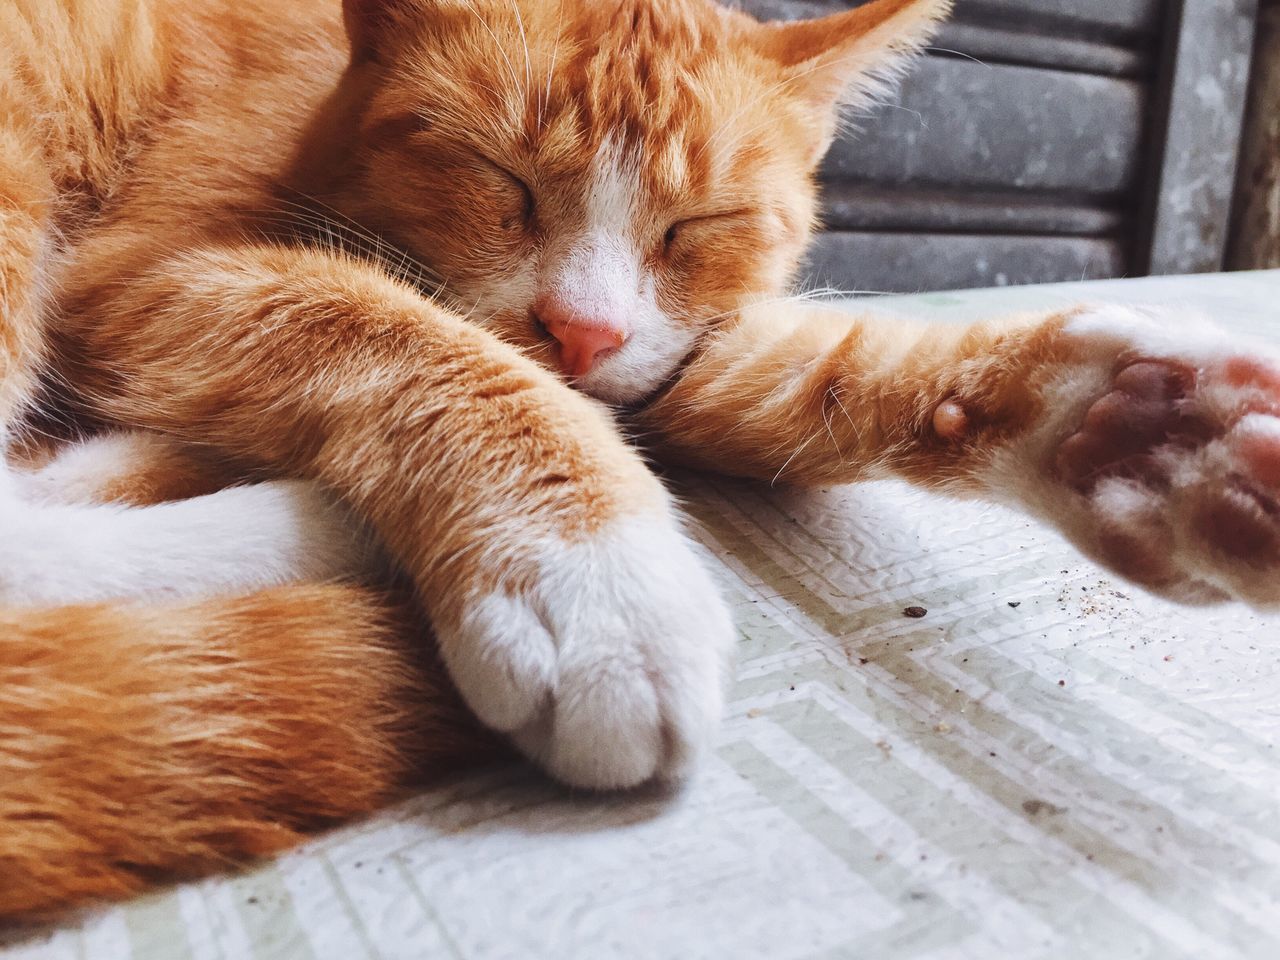 animal themes, mammal, domestic animals, pets, one animal, domestic cat, cat, feline, indoors, whisker, relaxation, sleeping, resting, close-up, lying down, brown, eyes closed, animal head, no people, animal body part